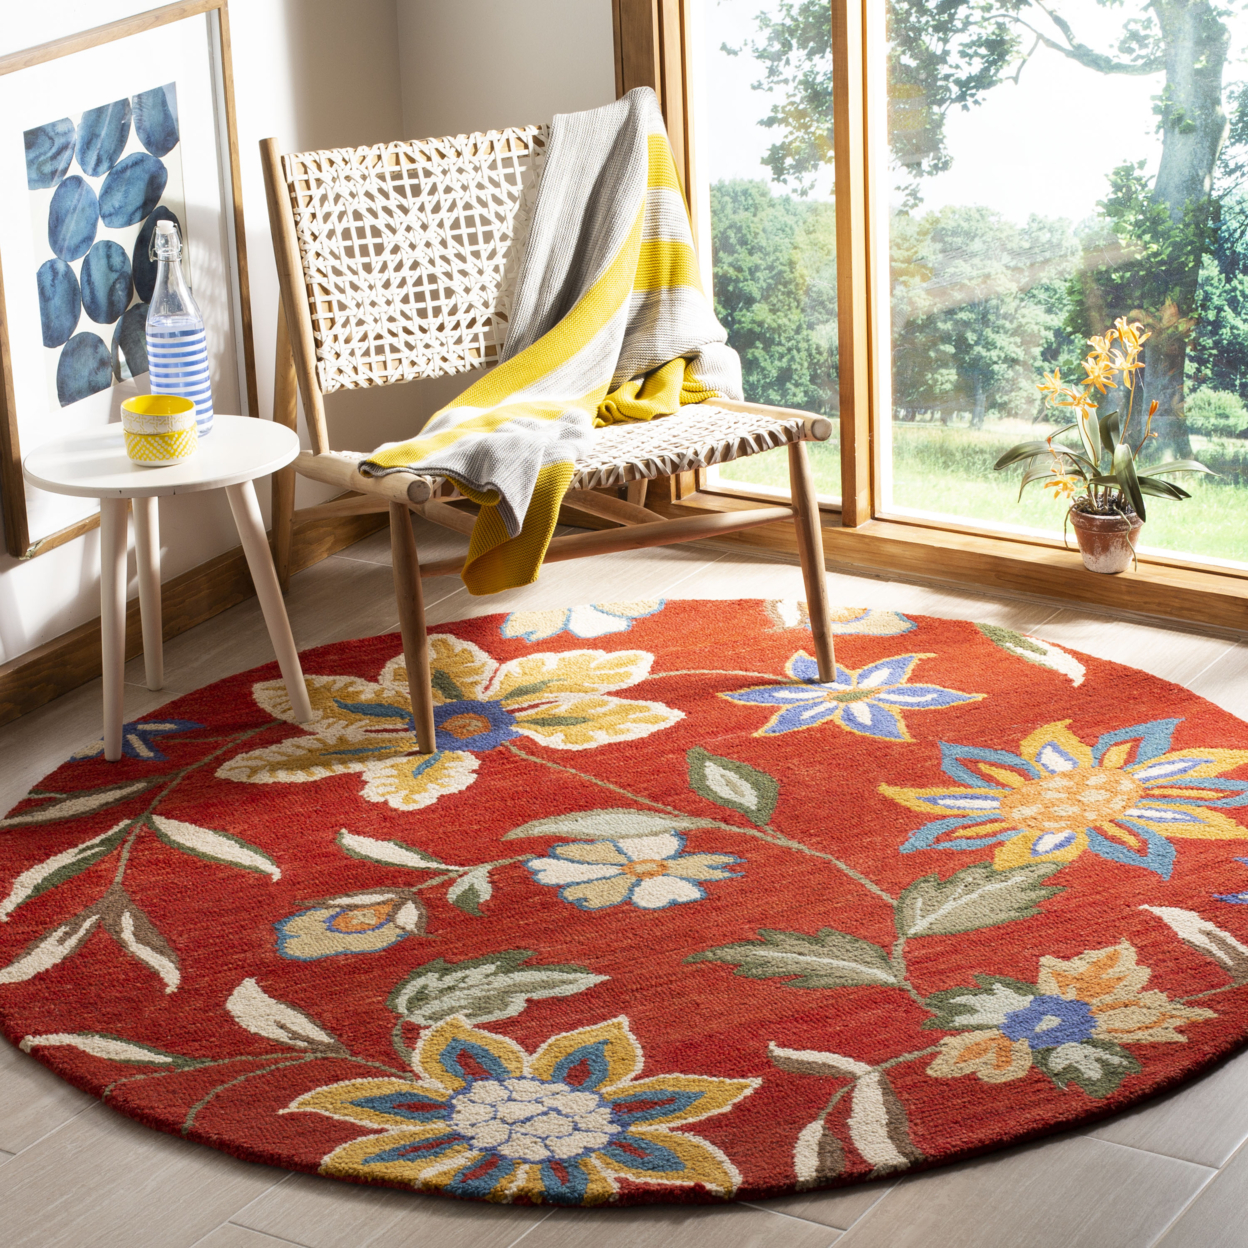 SAFAVIEH Blossom BLM673A Hand-hooked Rust / Multi Rug - 6' Round